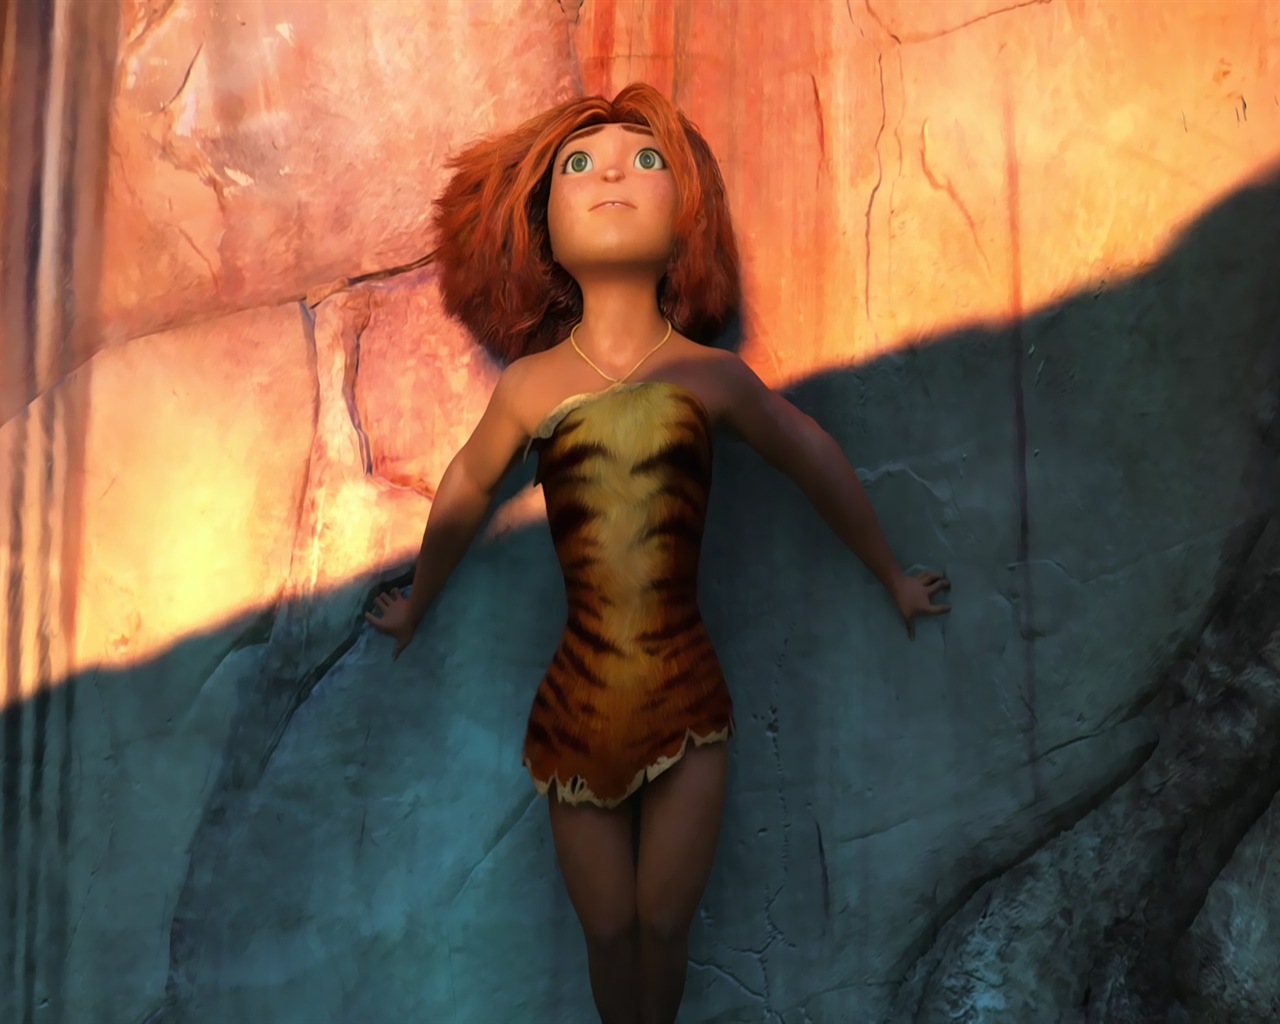 The Croods HD movie wallpapers #2 - 1280x1024